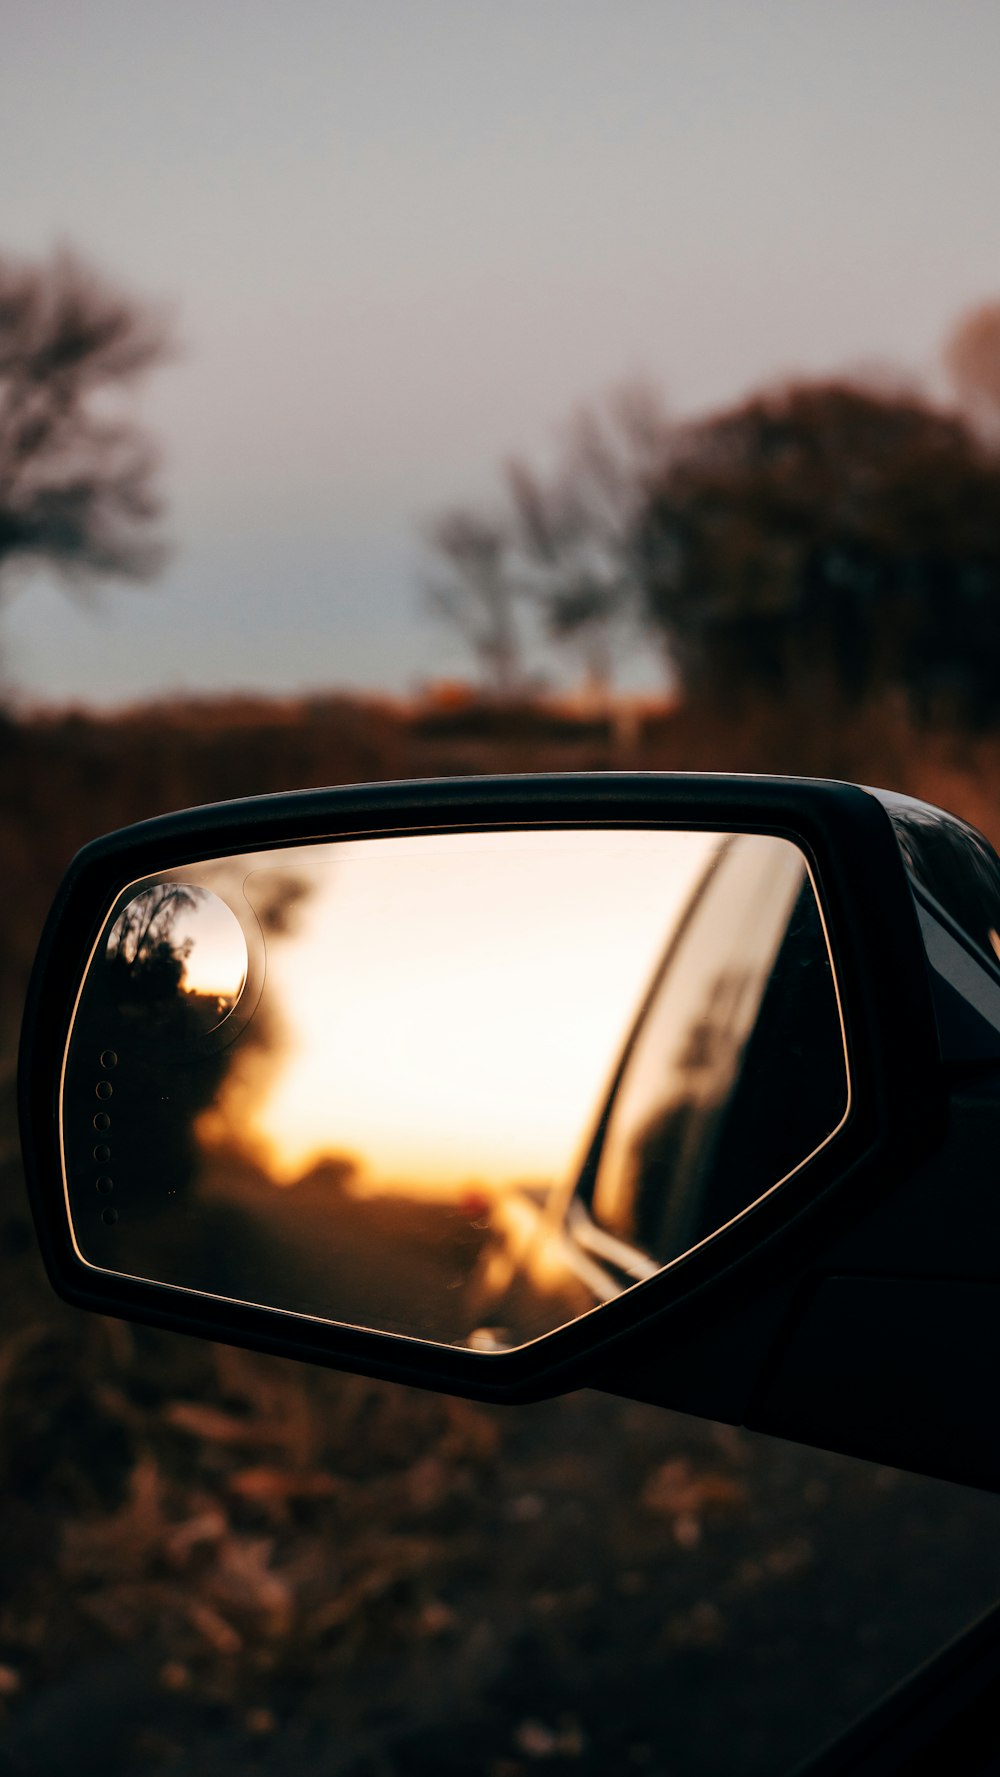 car side mirror with reflection of trees on road during daytime